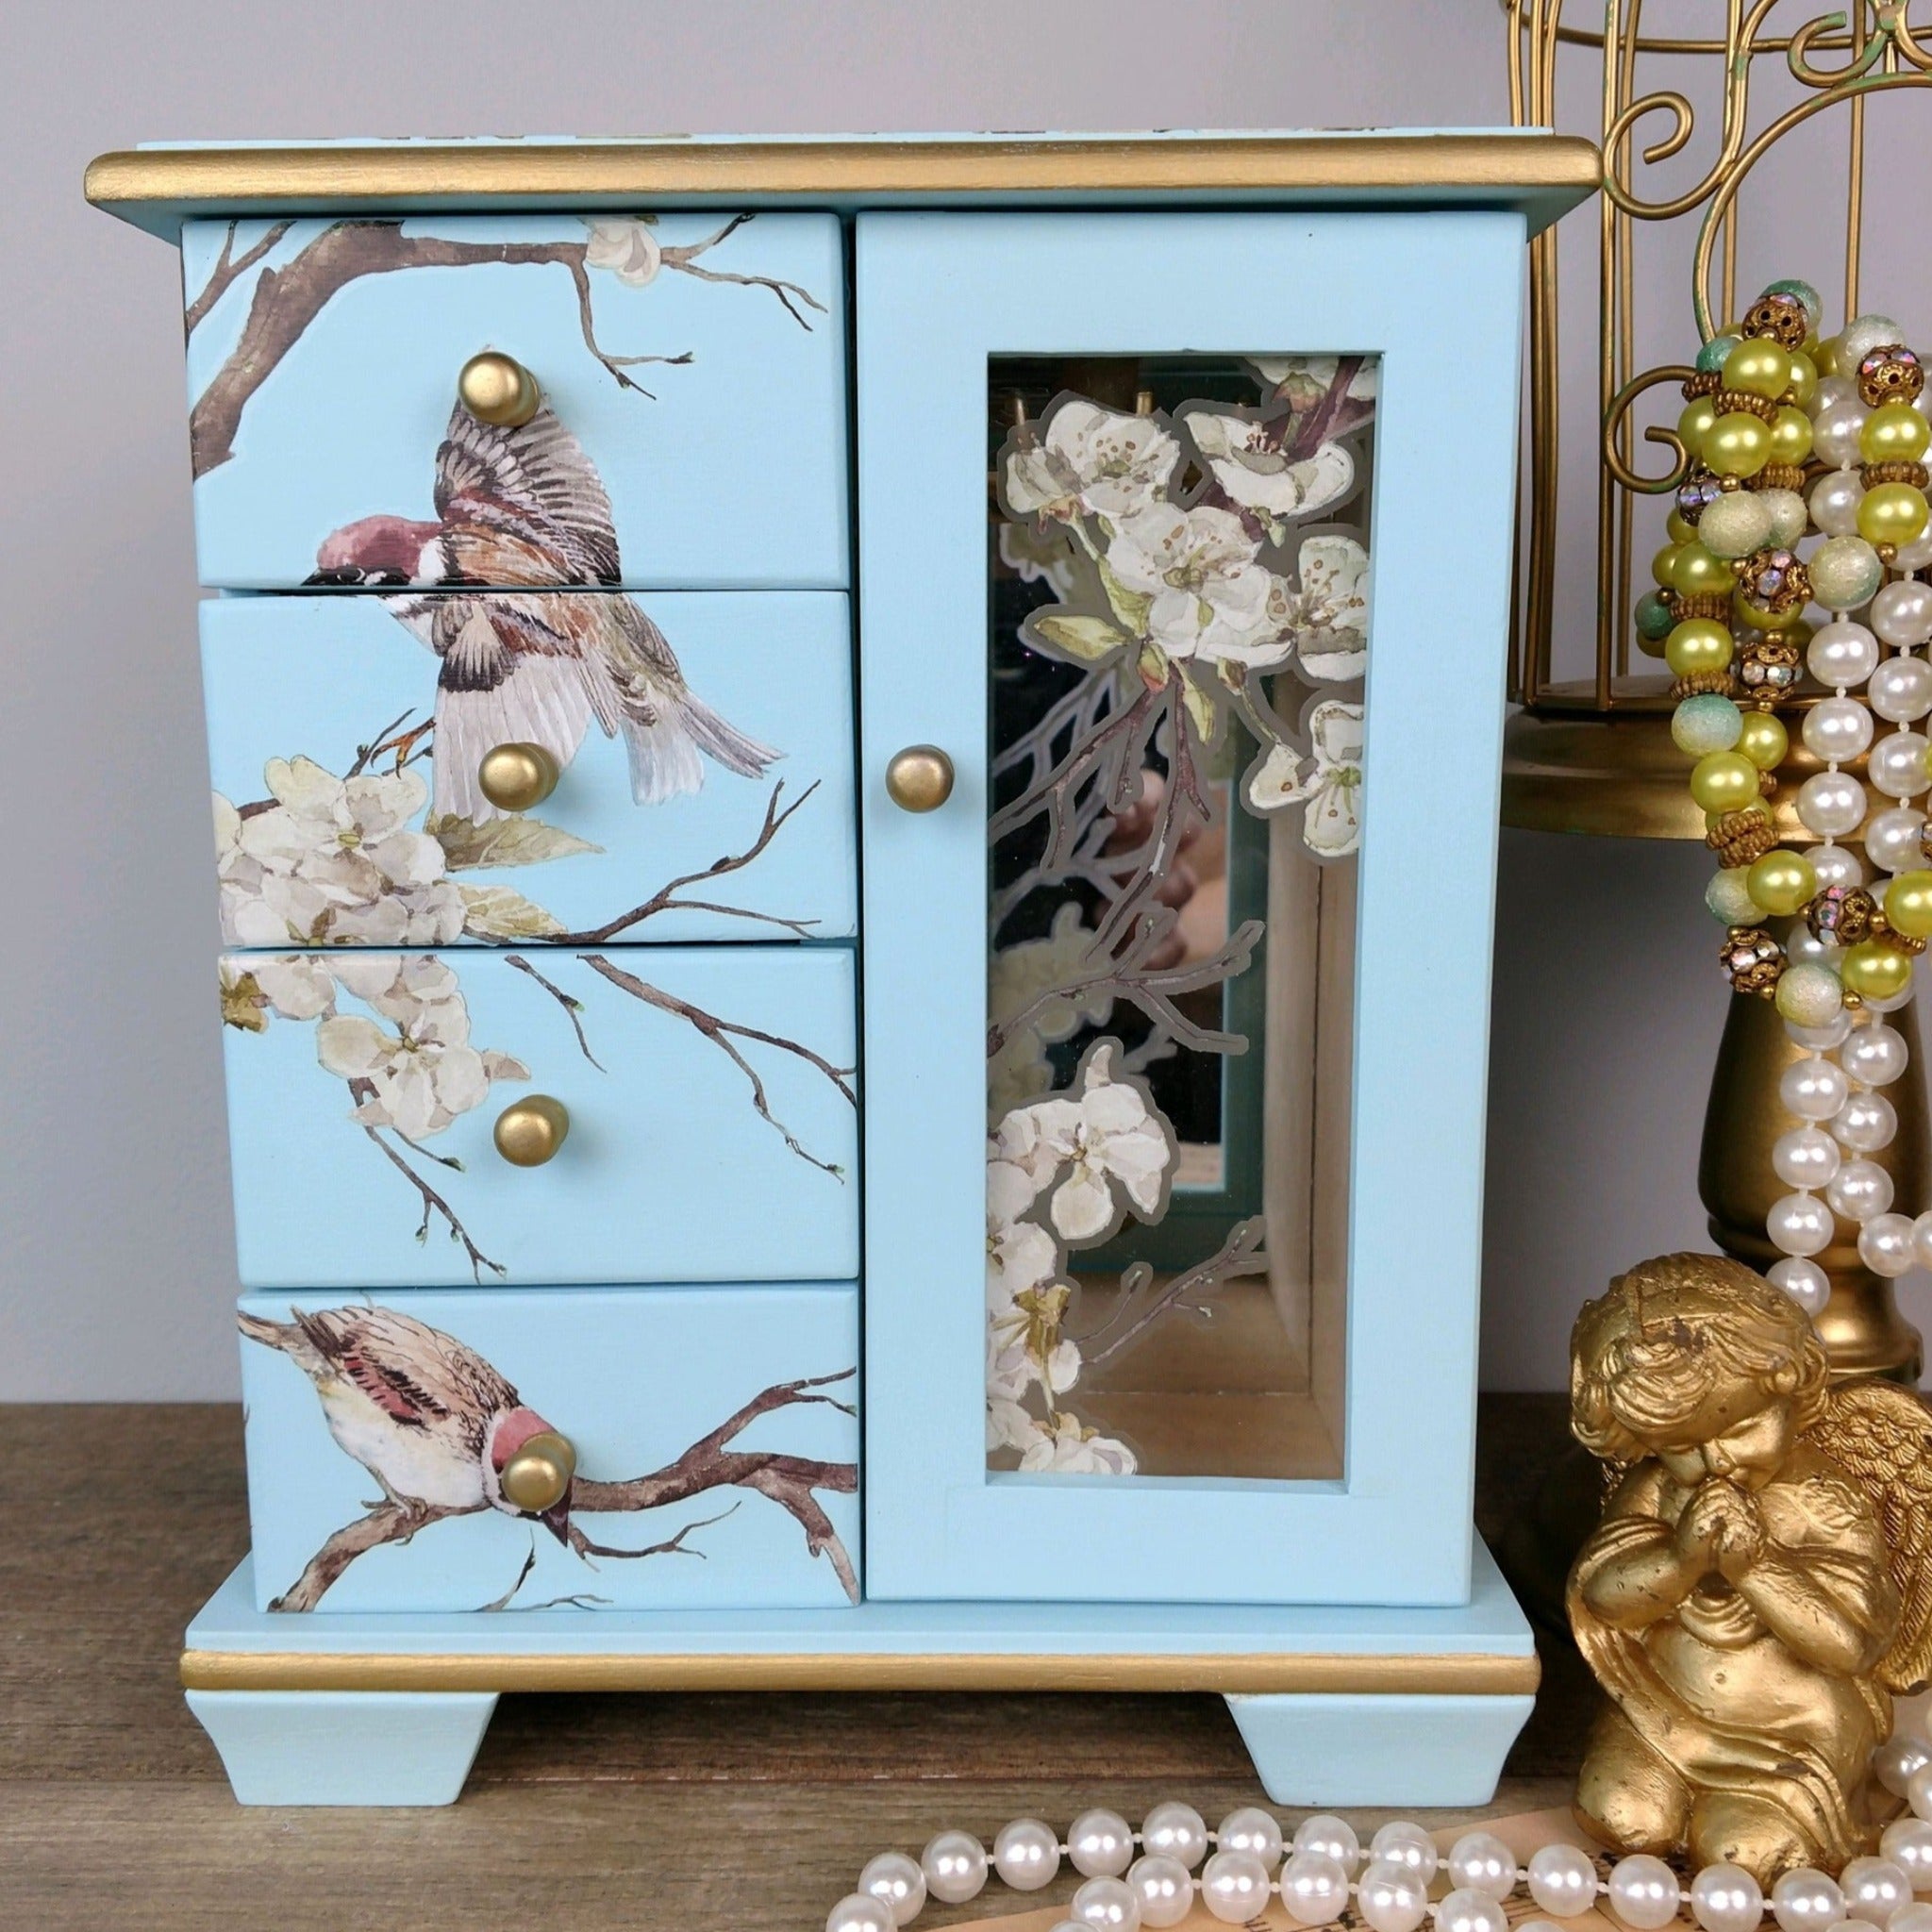 A small tabletop jewelry armoire is painted light blue with gold accents and features ReDesign with Prima's Blossom Flight transfer on it.